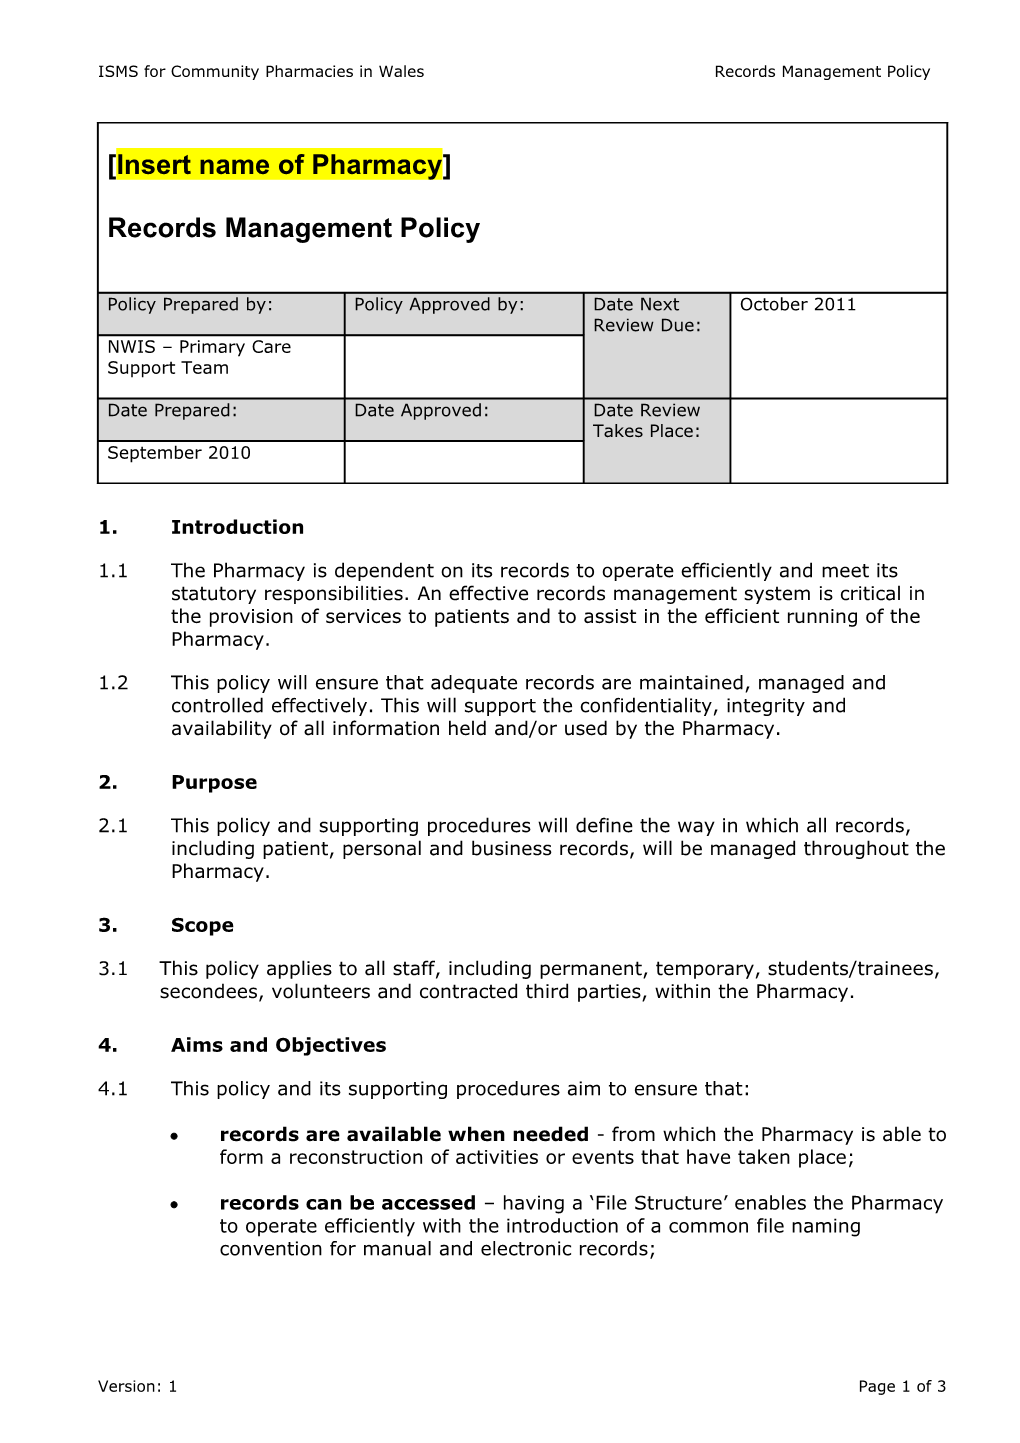 Records Management Policy (11